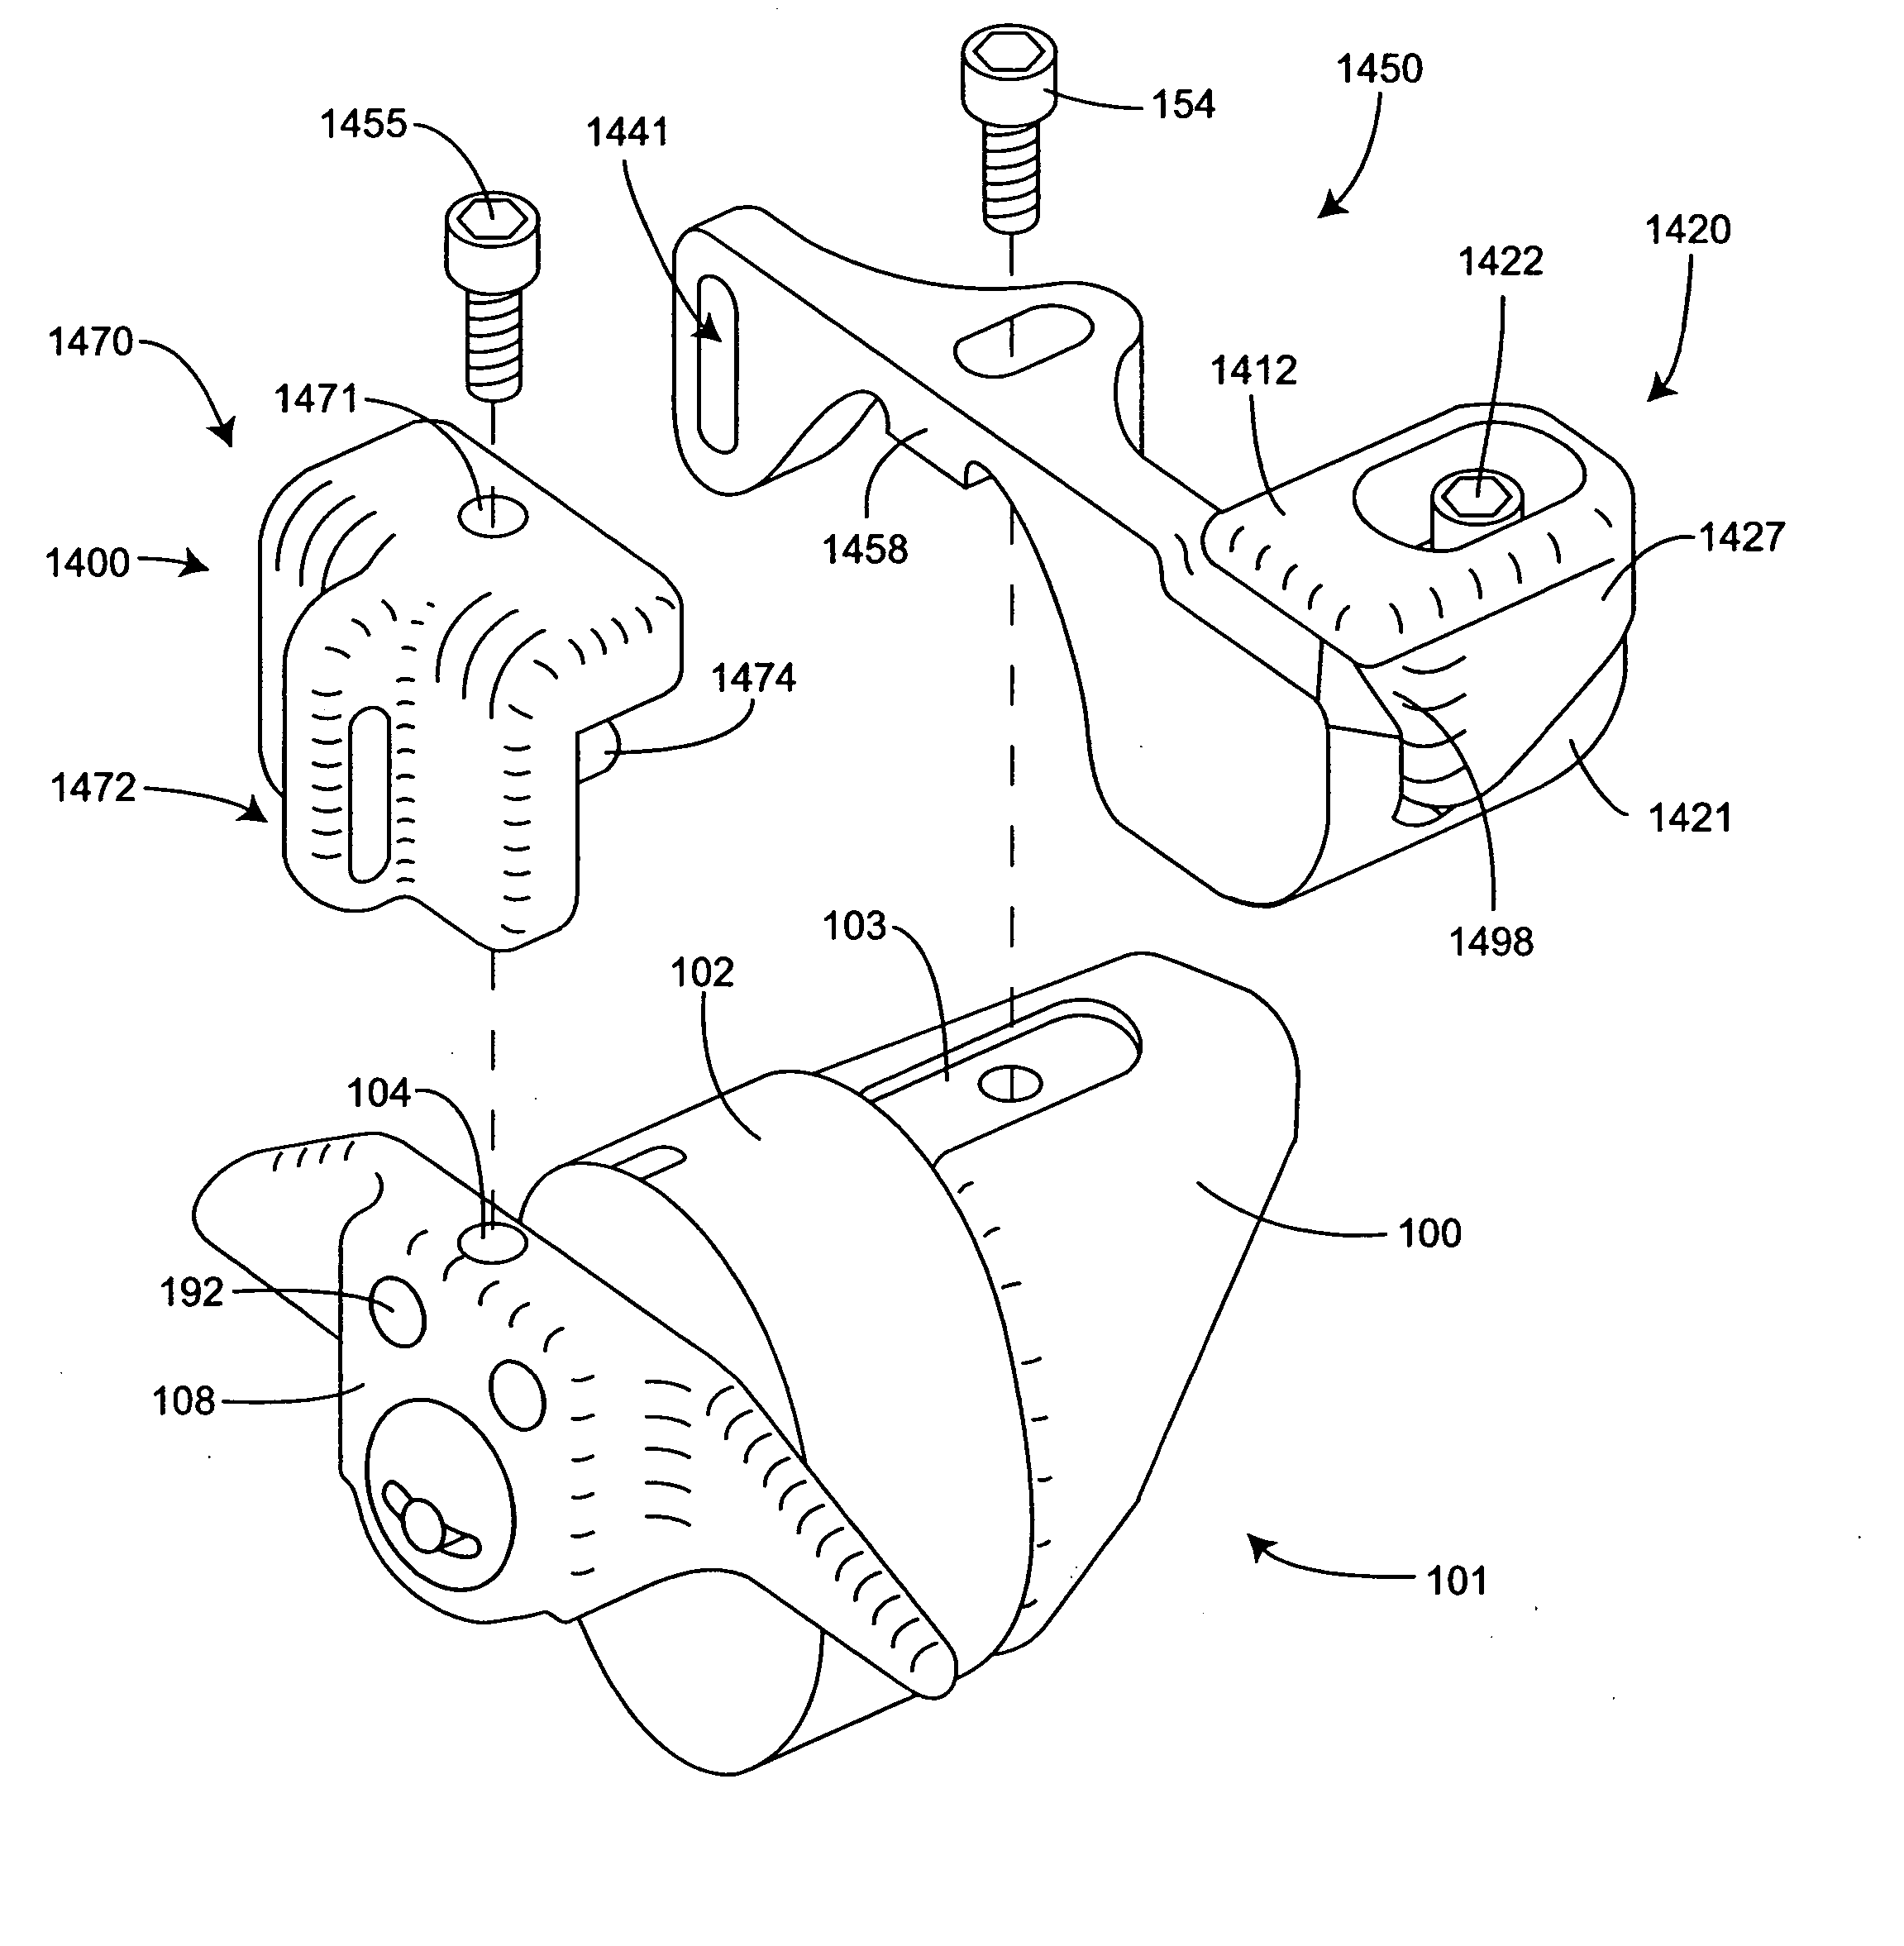 Interspinous process implant including a binder and method of implantation